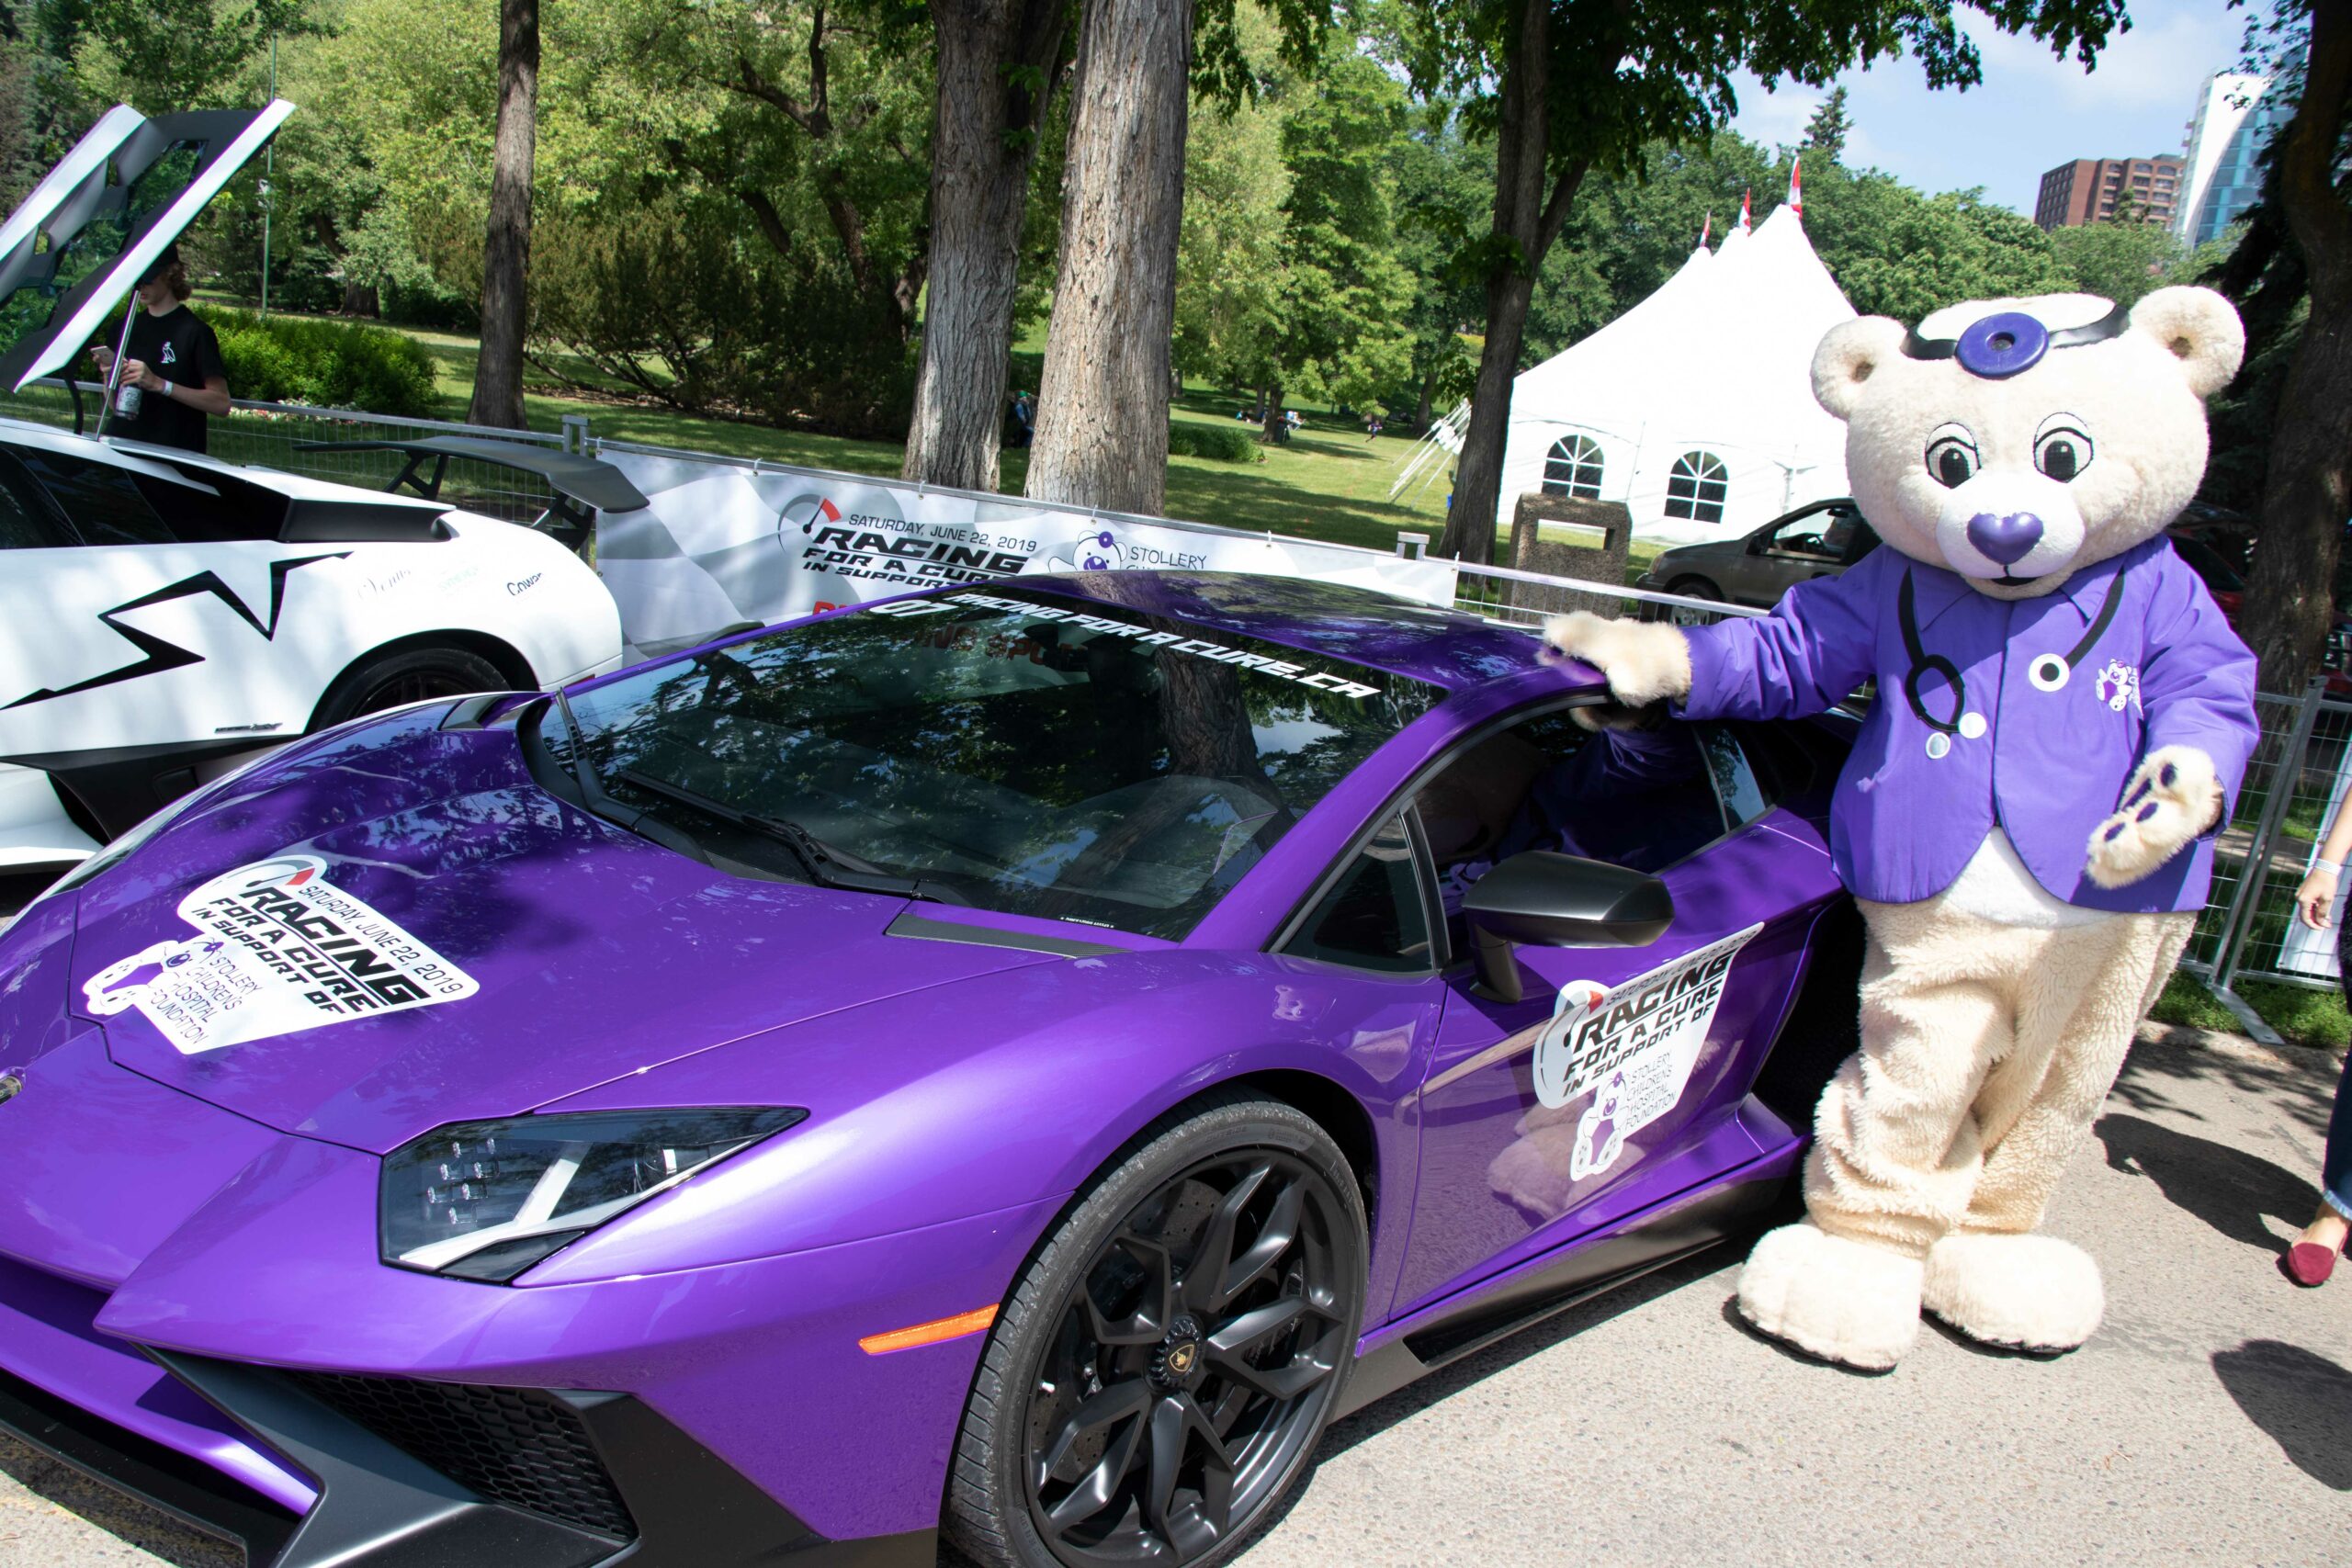 dr patchup standing next to purple sports car at racing for a cure event